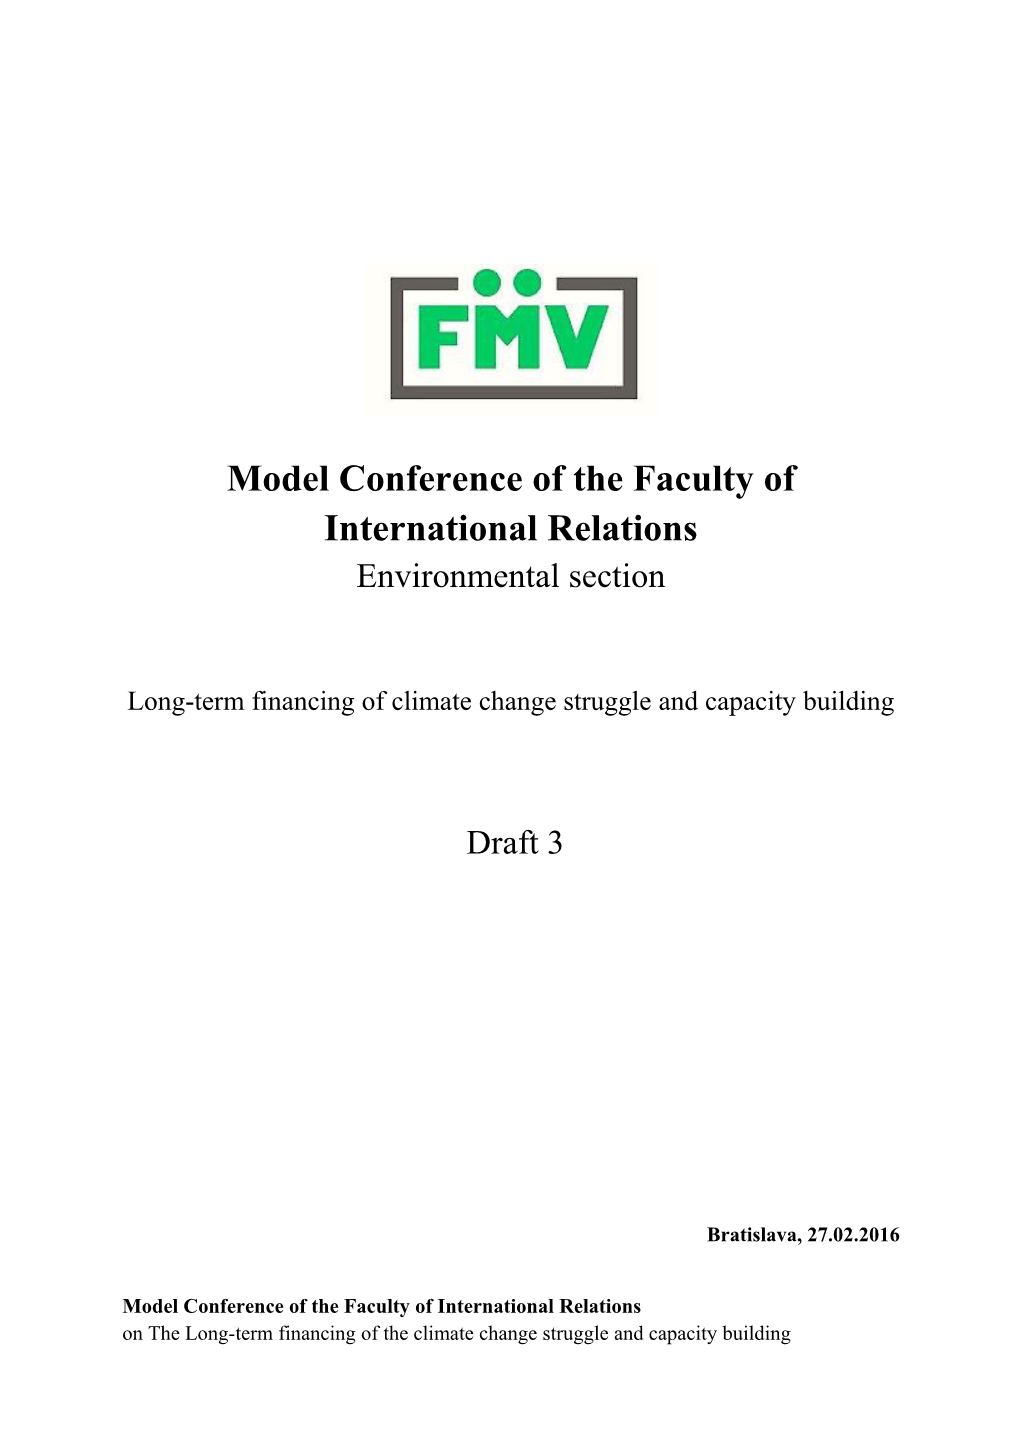 Model Conference of the Faculty of the International Relations